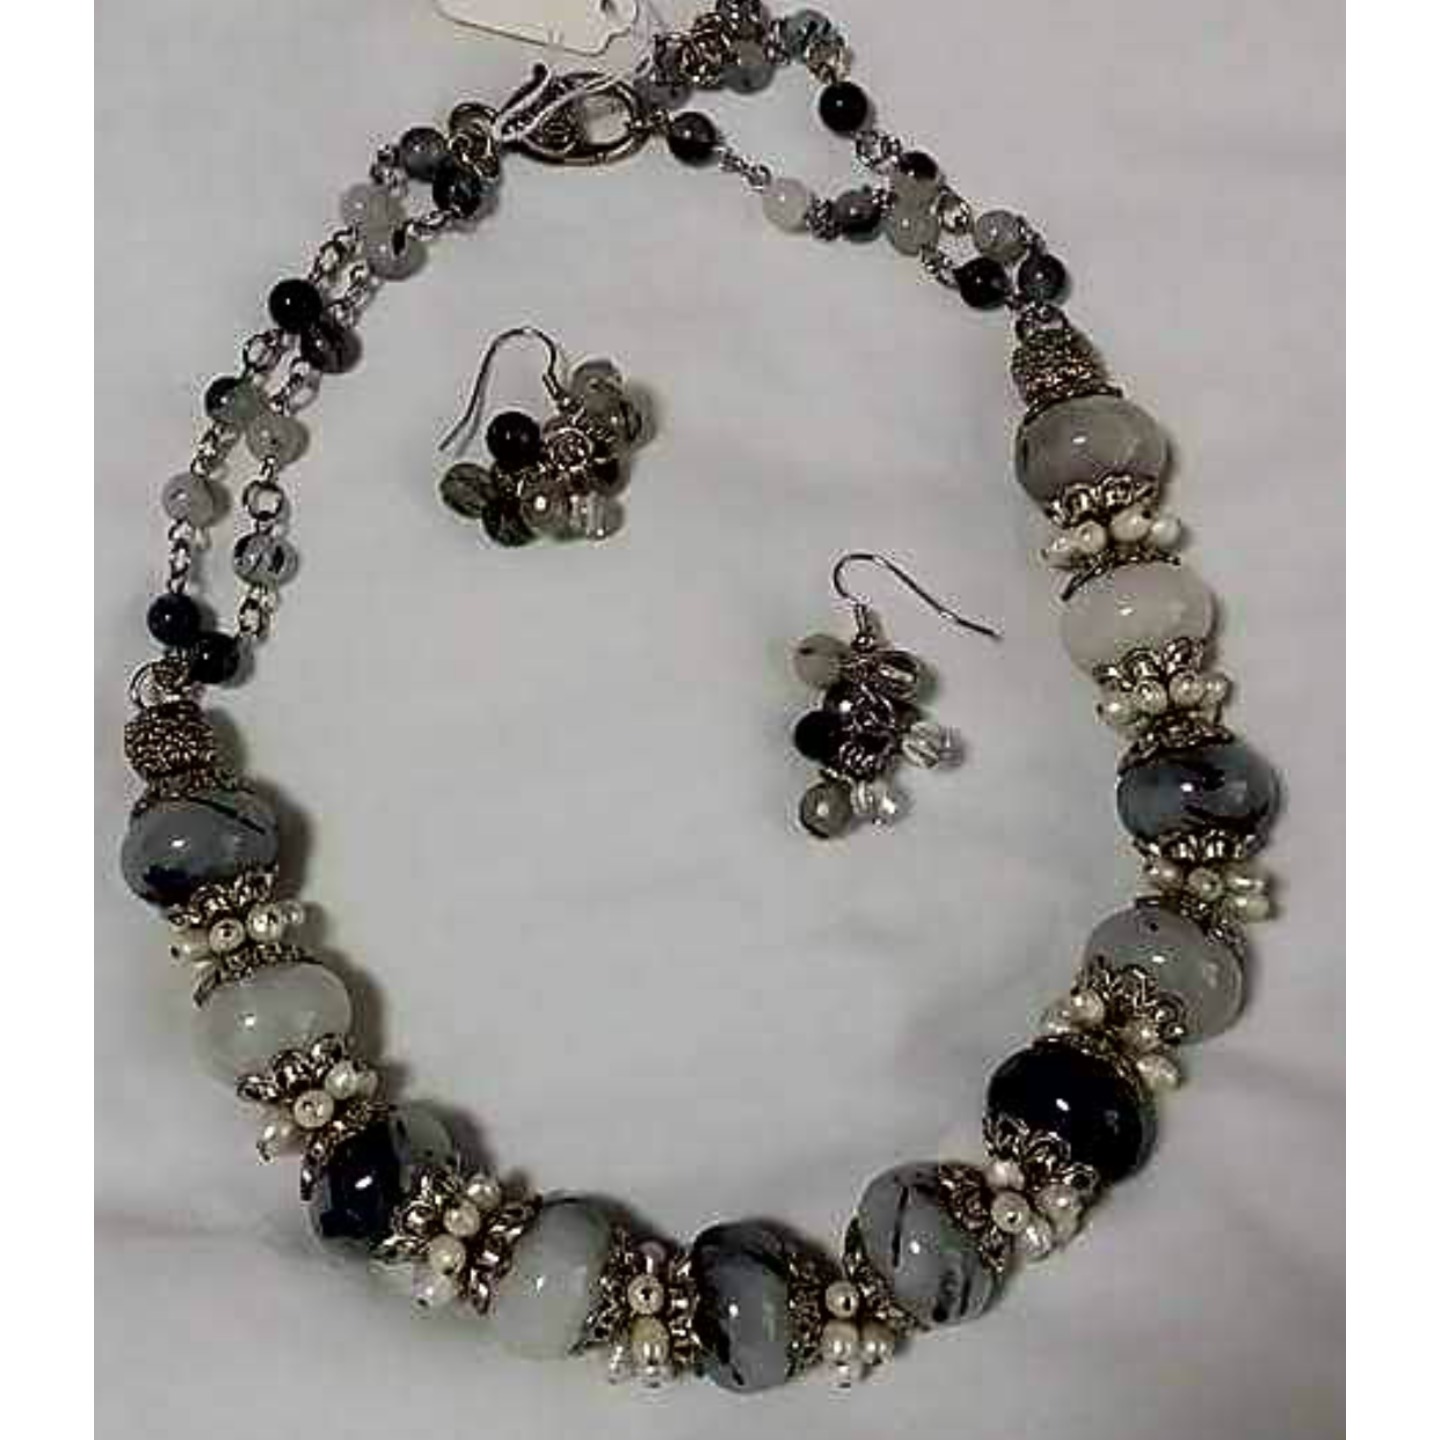 AnGels Routilated Quartz Neckpiece with Earrings